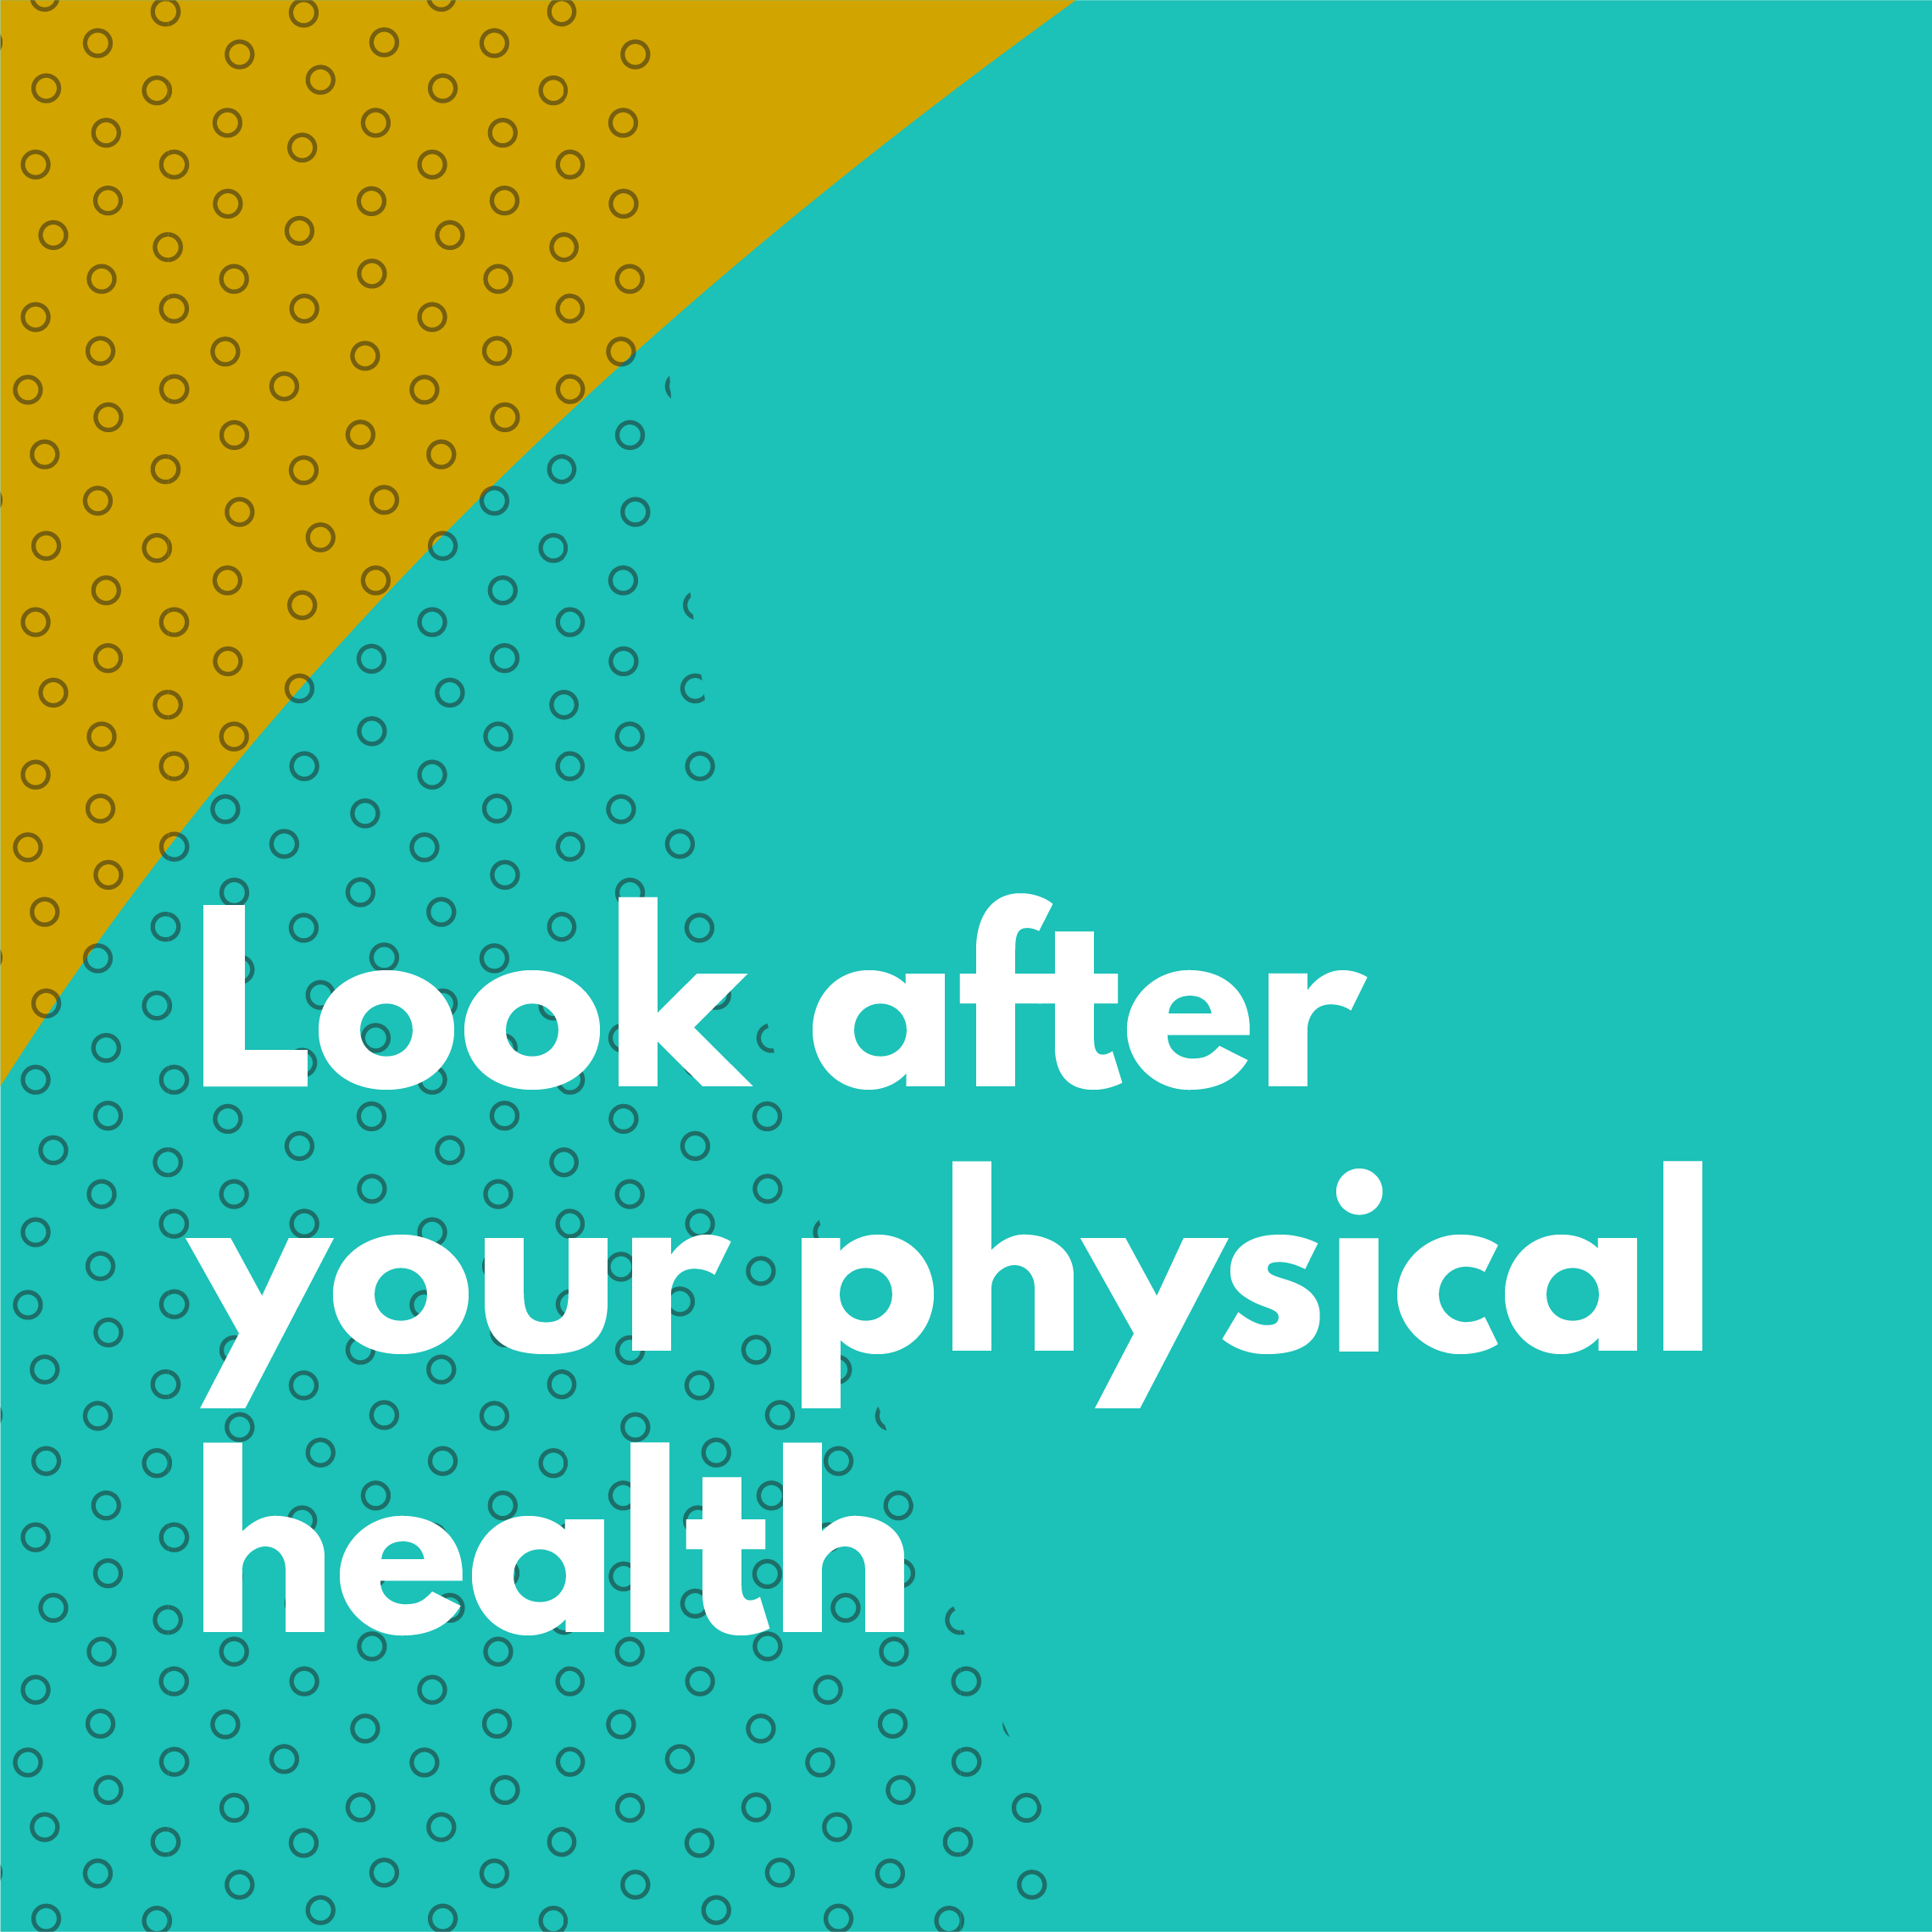 Look after your physical health